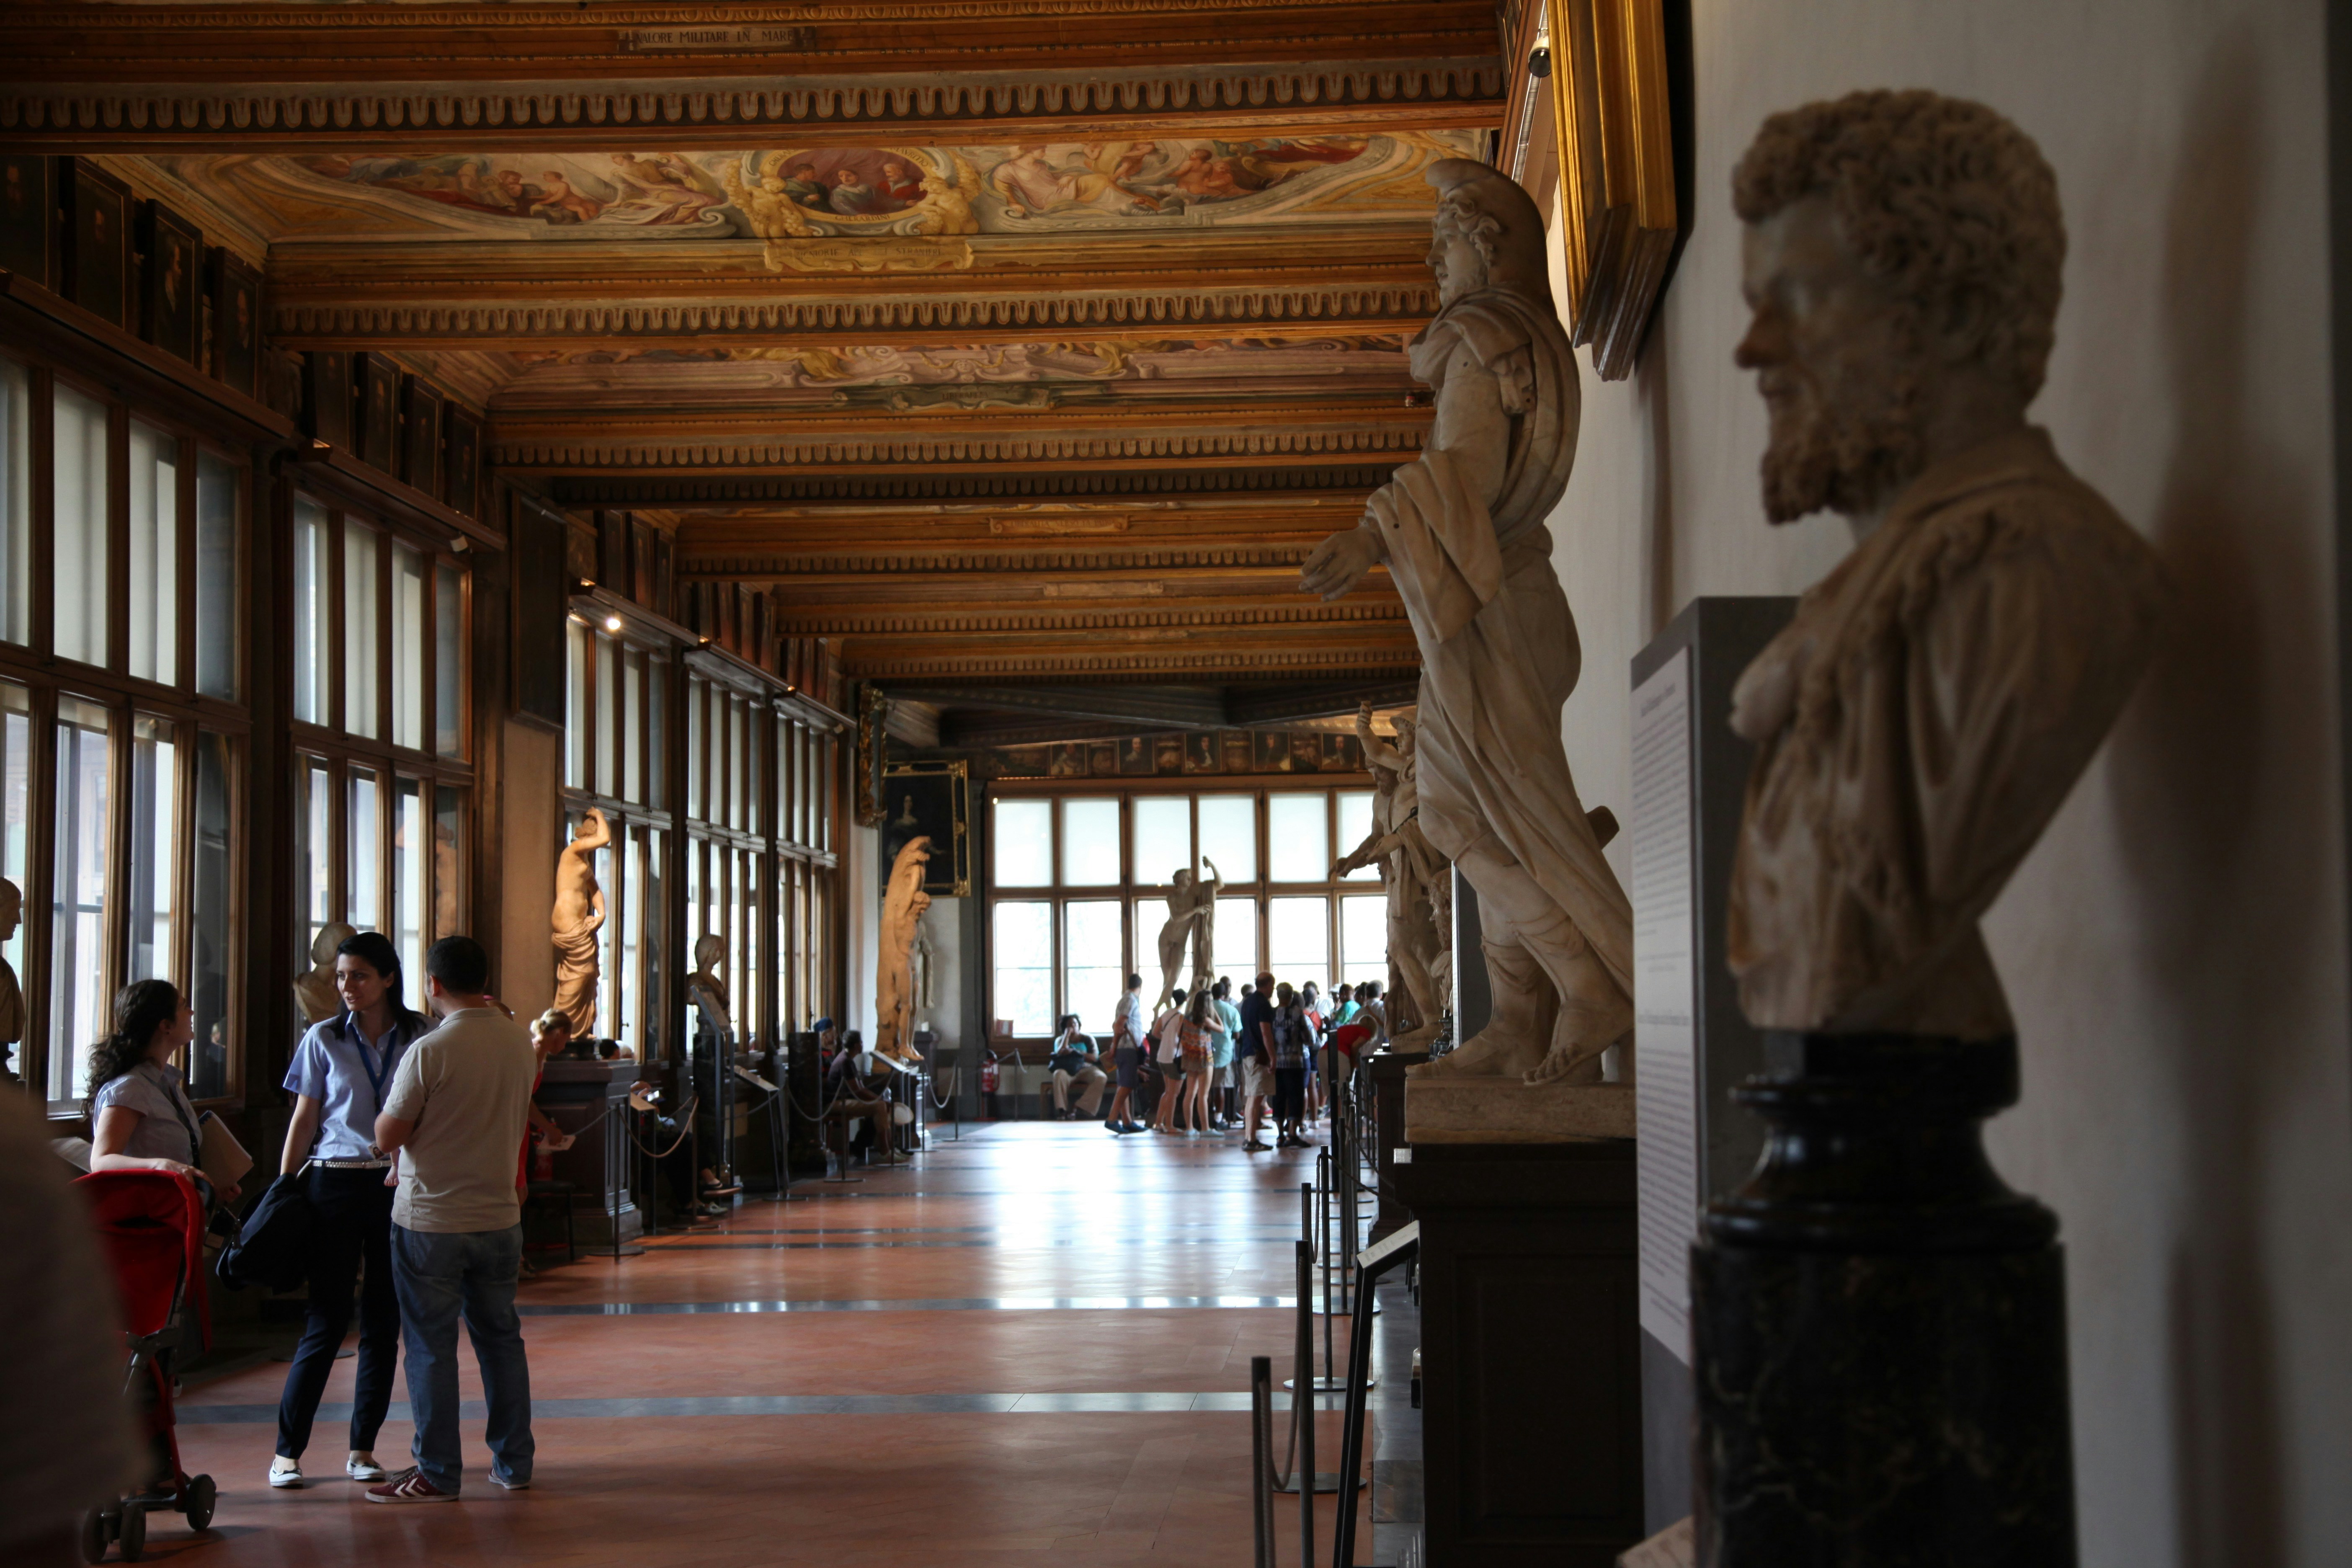 A sculpture within the Uffizi gallery in Florence, Italy